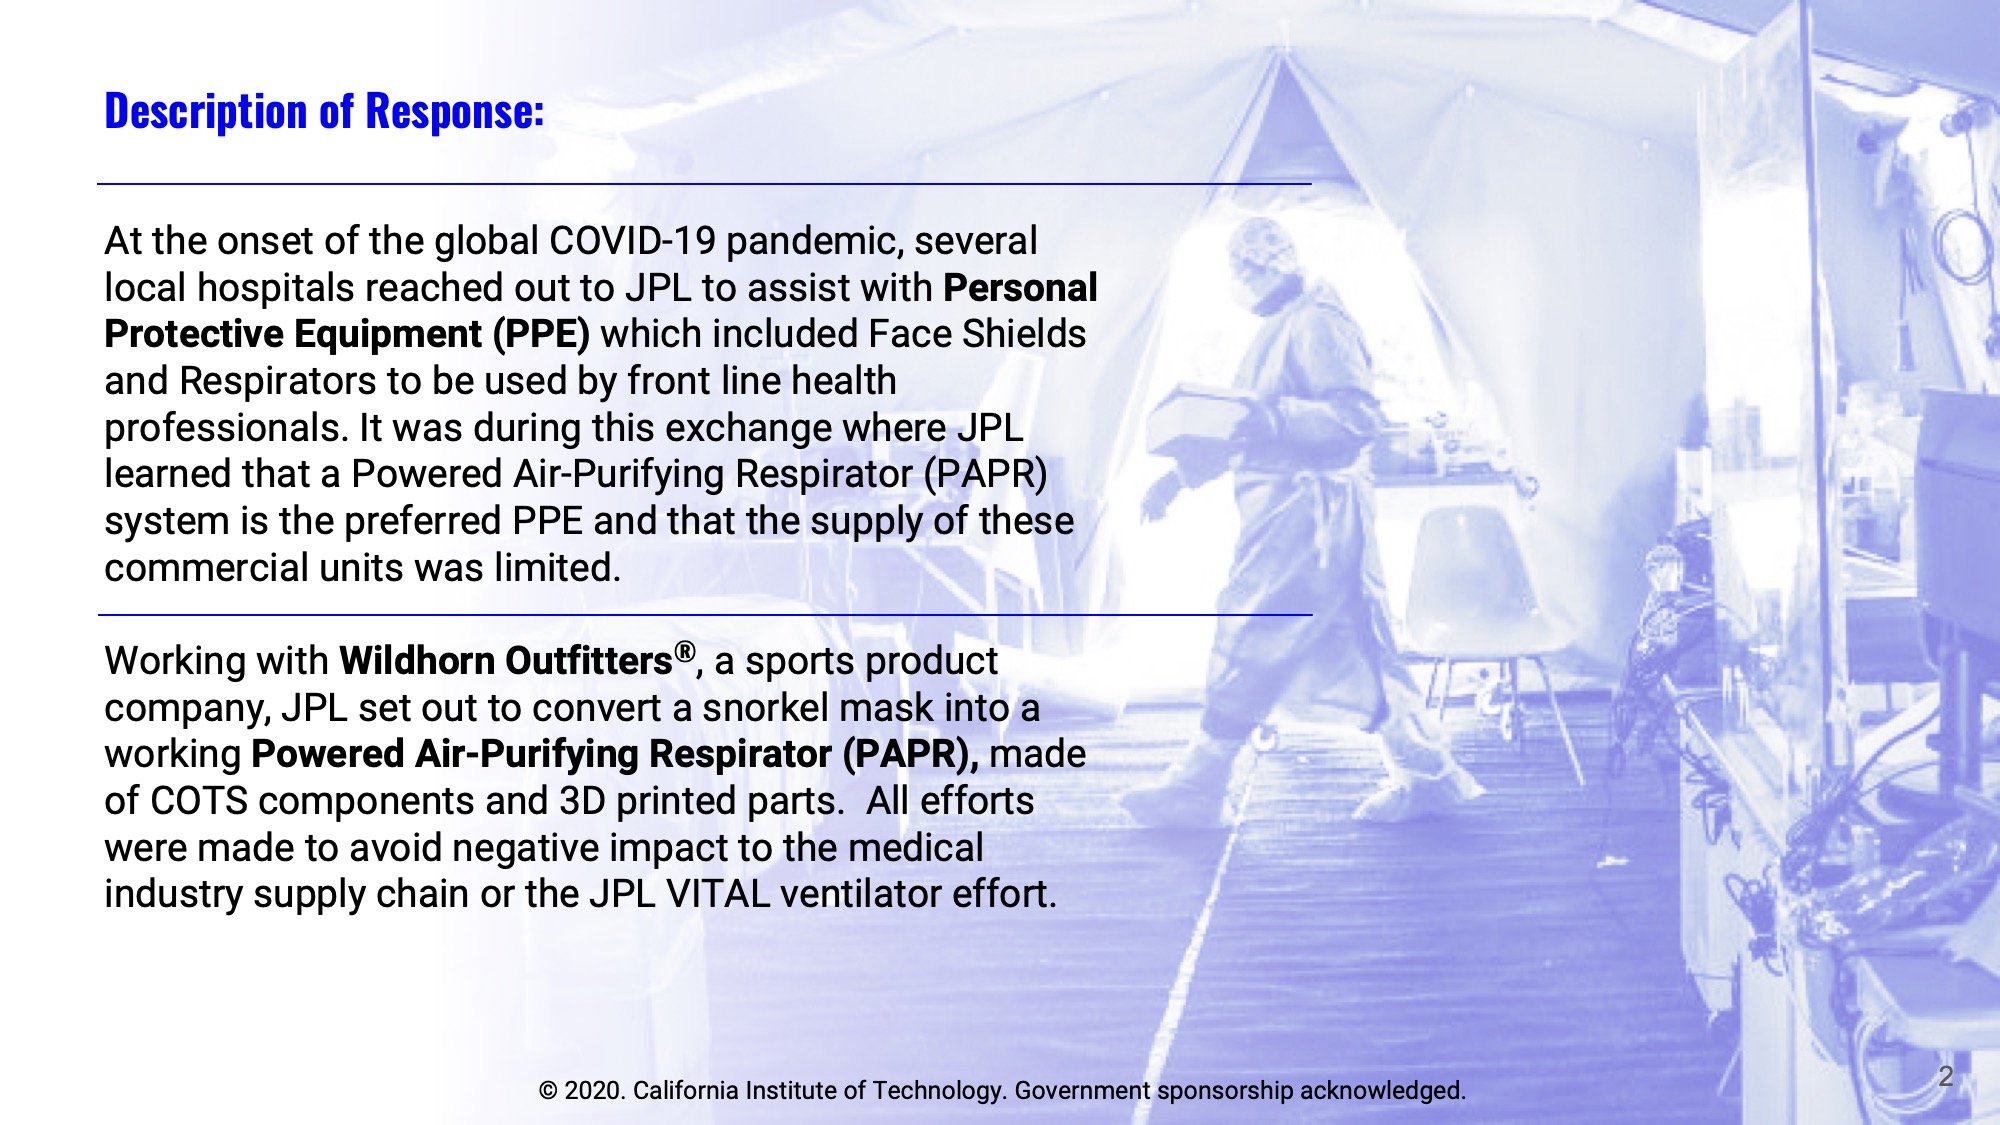 Slide 2: Description of Response: At the onset of the global COVID-19 pandemic, several local hospitals reached out to JPL to assist with Personal Protective Equipment (PPE) which included Face Shields and Respirators to be used by front line health professionals. It was during this exchange where JPL learned that a Powered Air-Purifying Respirator (PAPR) system is the preferred PPE and that the supply of these commercial units was limited.  Working with Wildhorn Outfitters®, a sports product company, JPL set out to convert a snorkel mask into a working Powered Air-Purifying Respirator (PAPR), made of COTS components and 3D printed parts.  All efforts were made to avoid negative impact to the medical industry supply chain or the JPL VITAL ventilator effort.